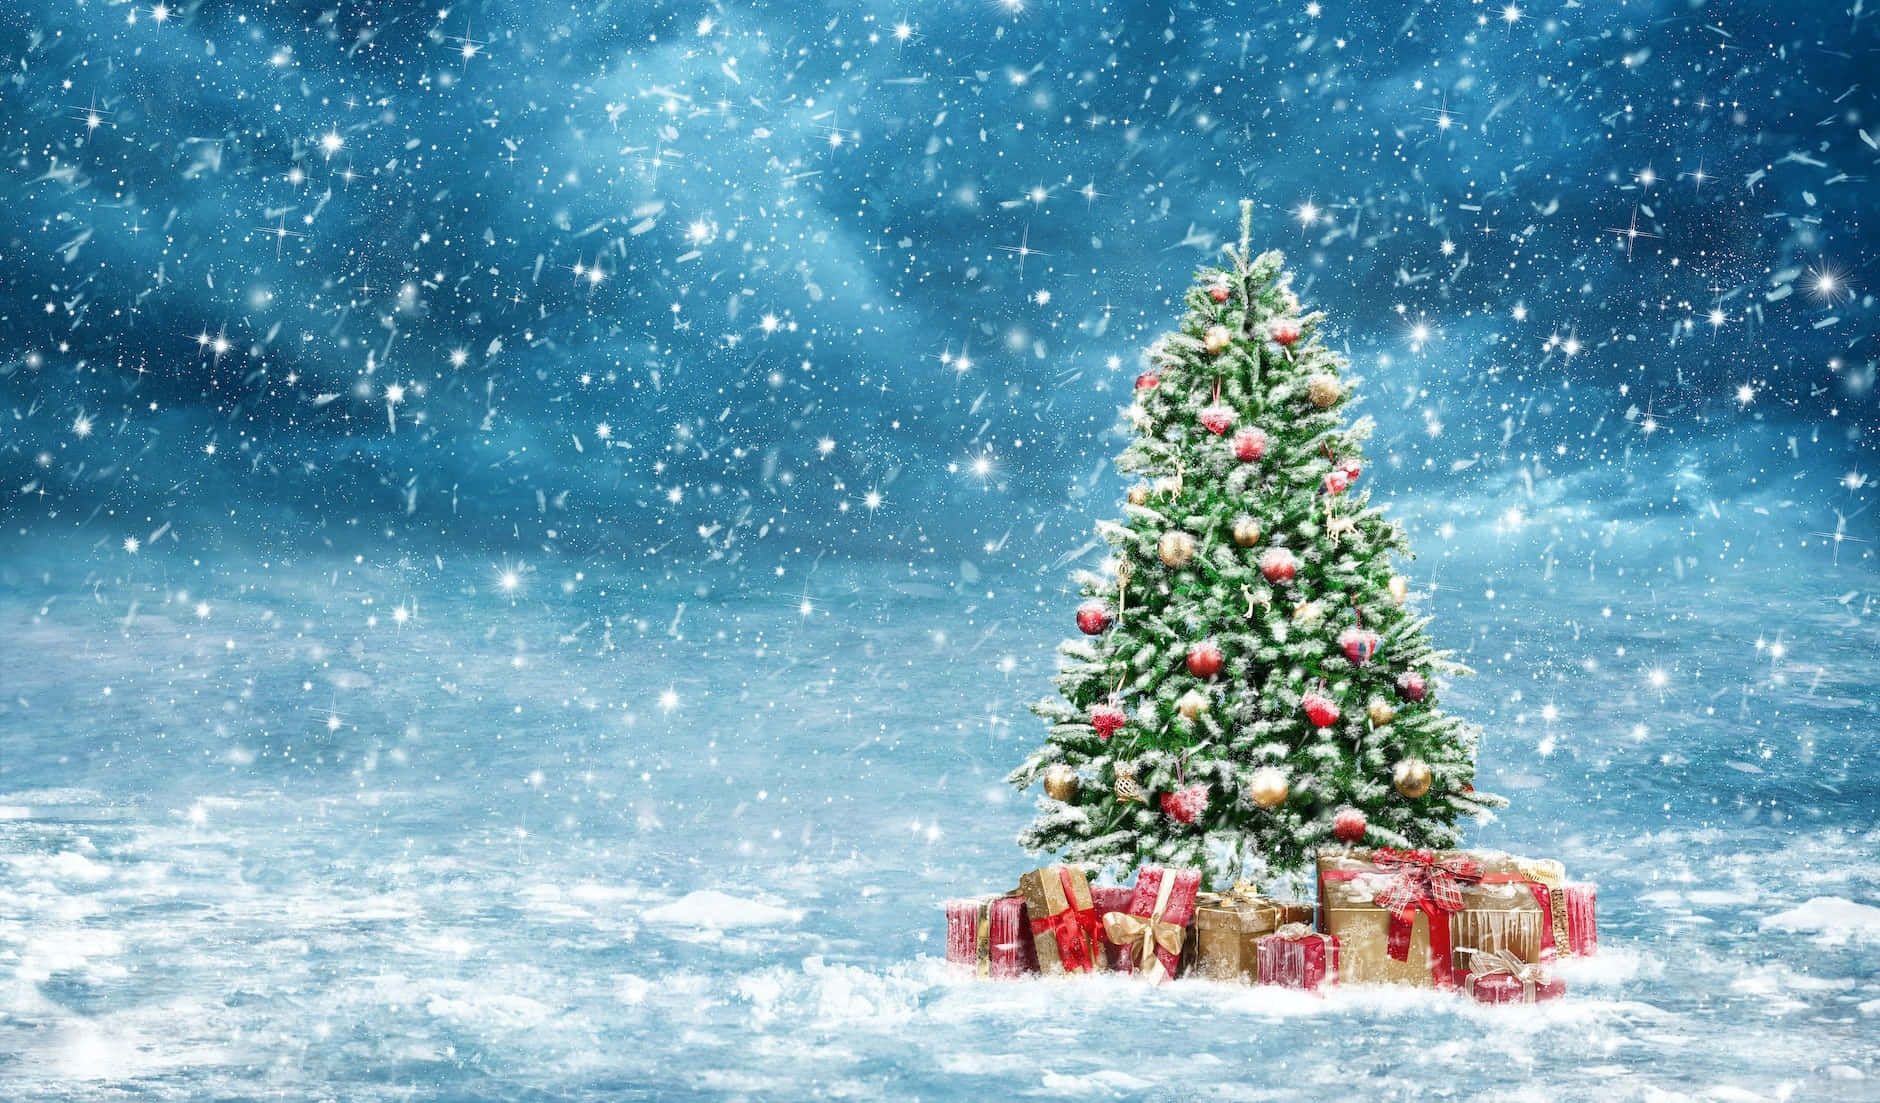 Christmas Tree&Snow Pictures